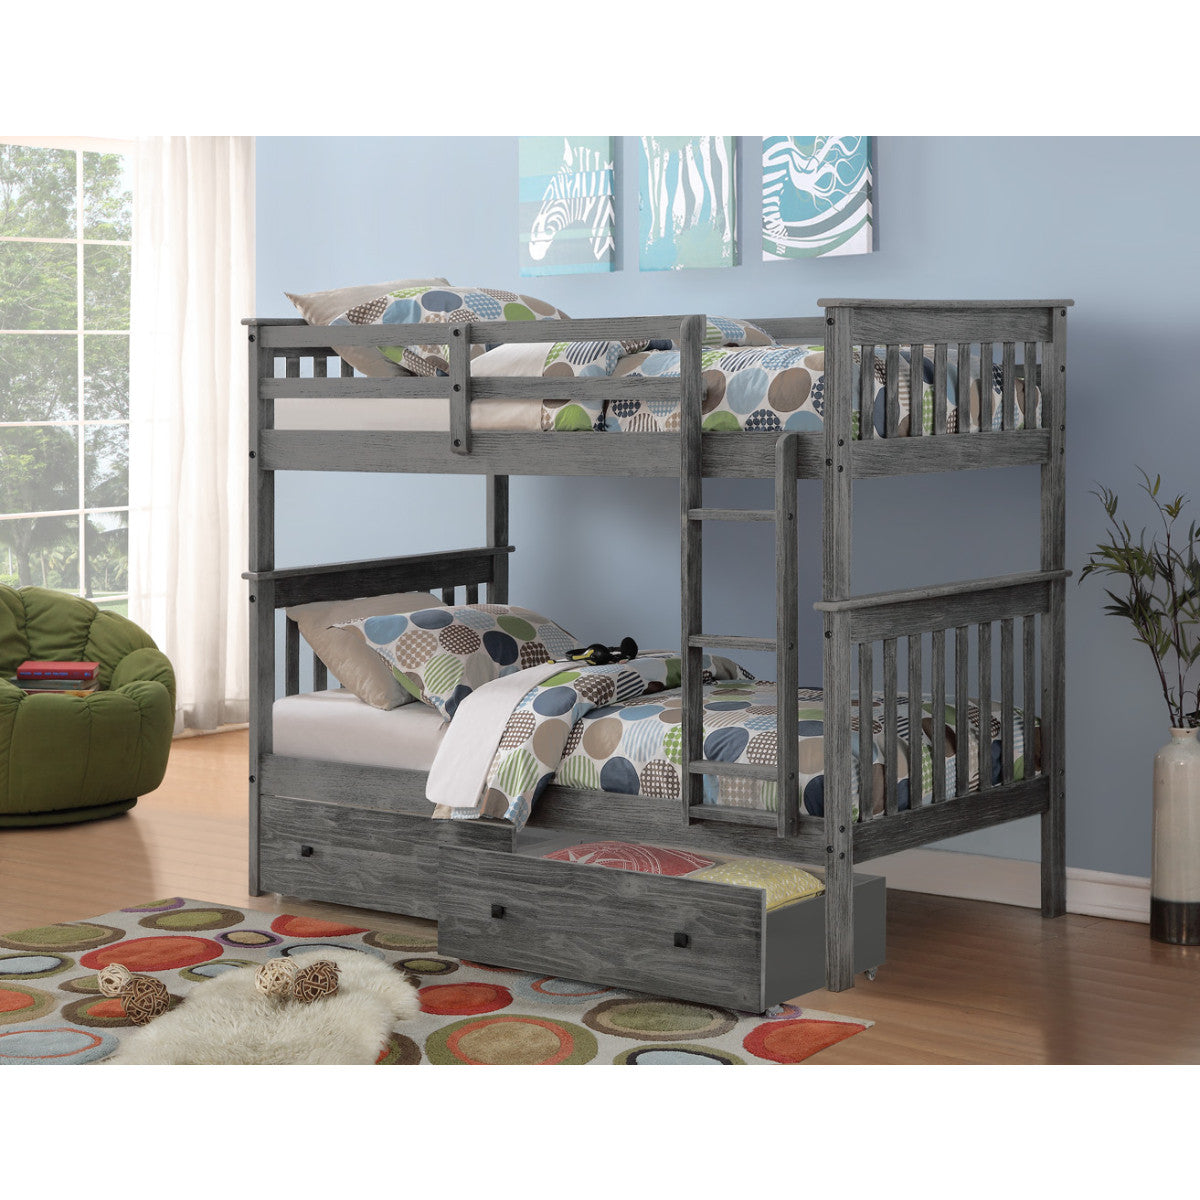 TWIN/TWIN MISSION BUNK BED WITH DUAL UNDER BED DRAWERS BRUSHED GREY FINISH